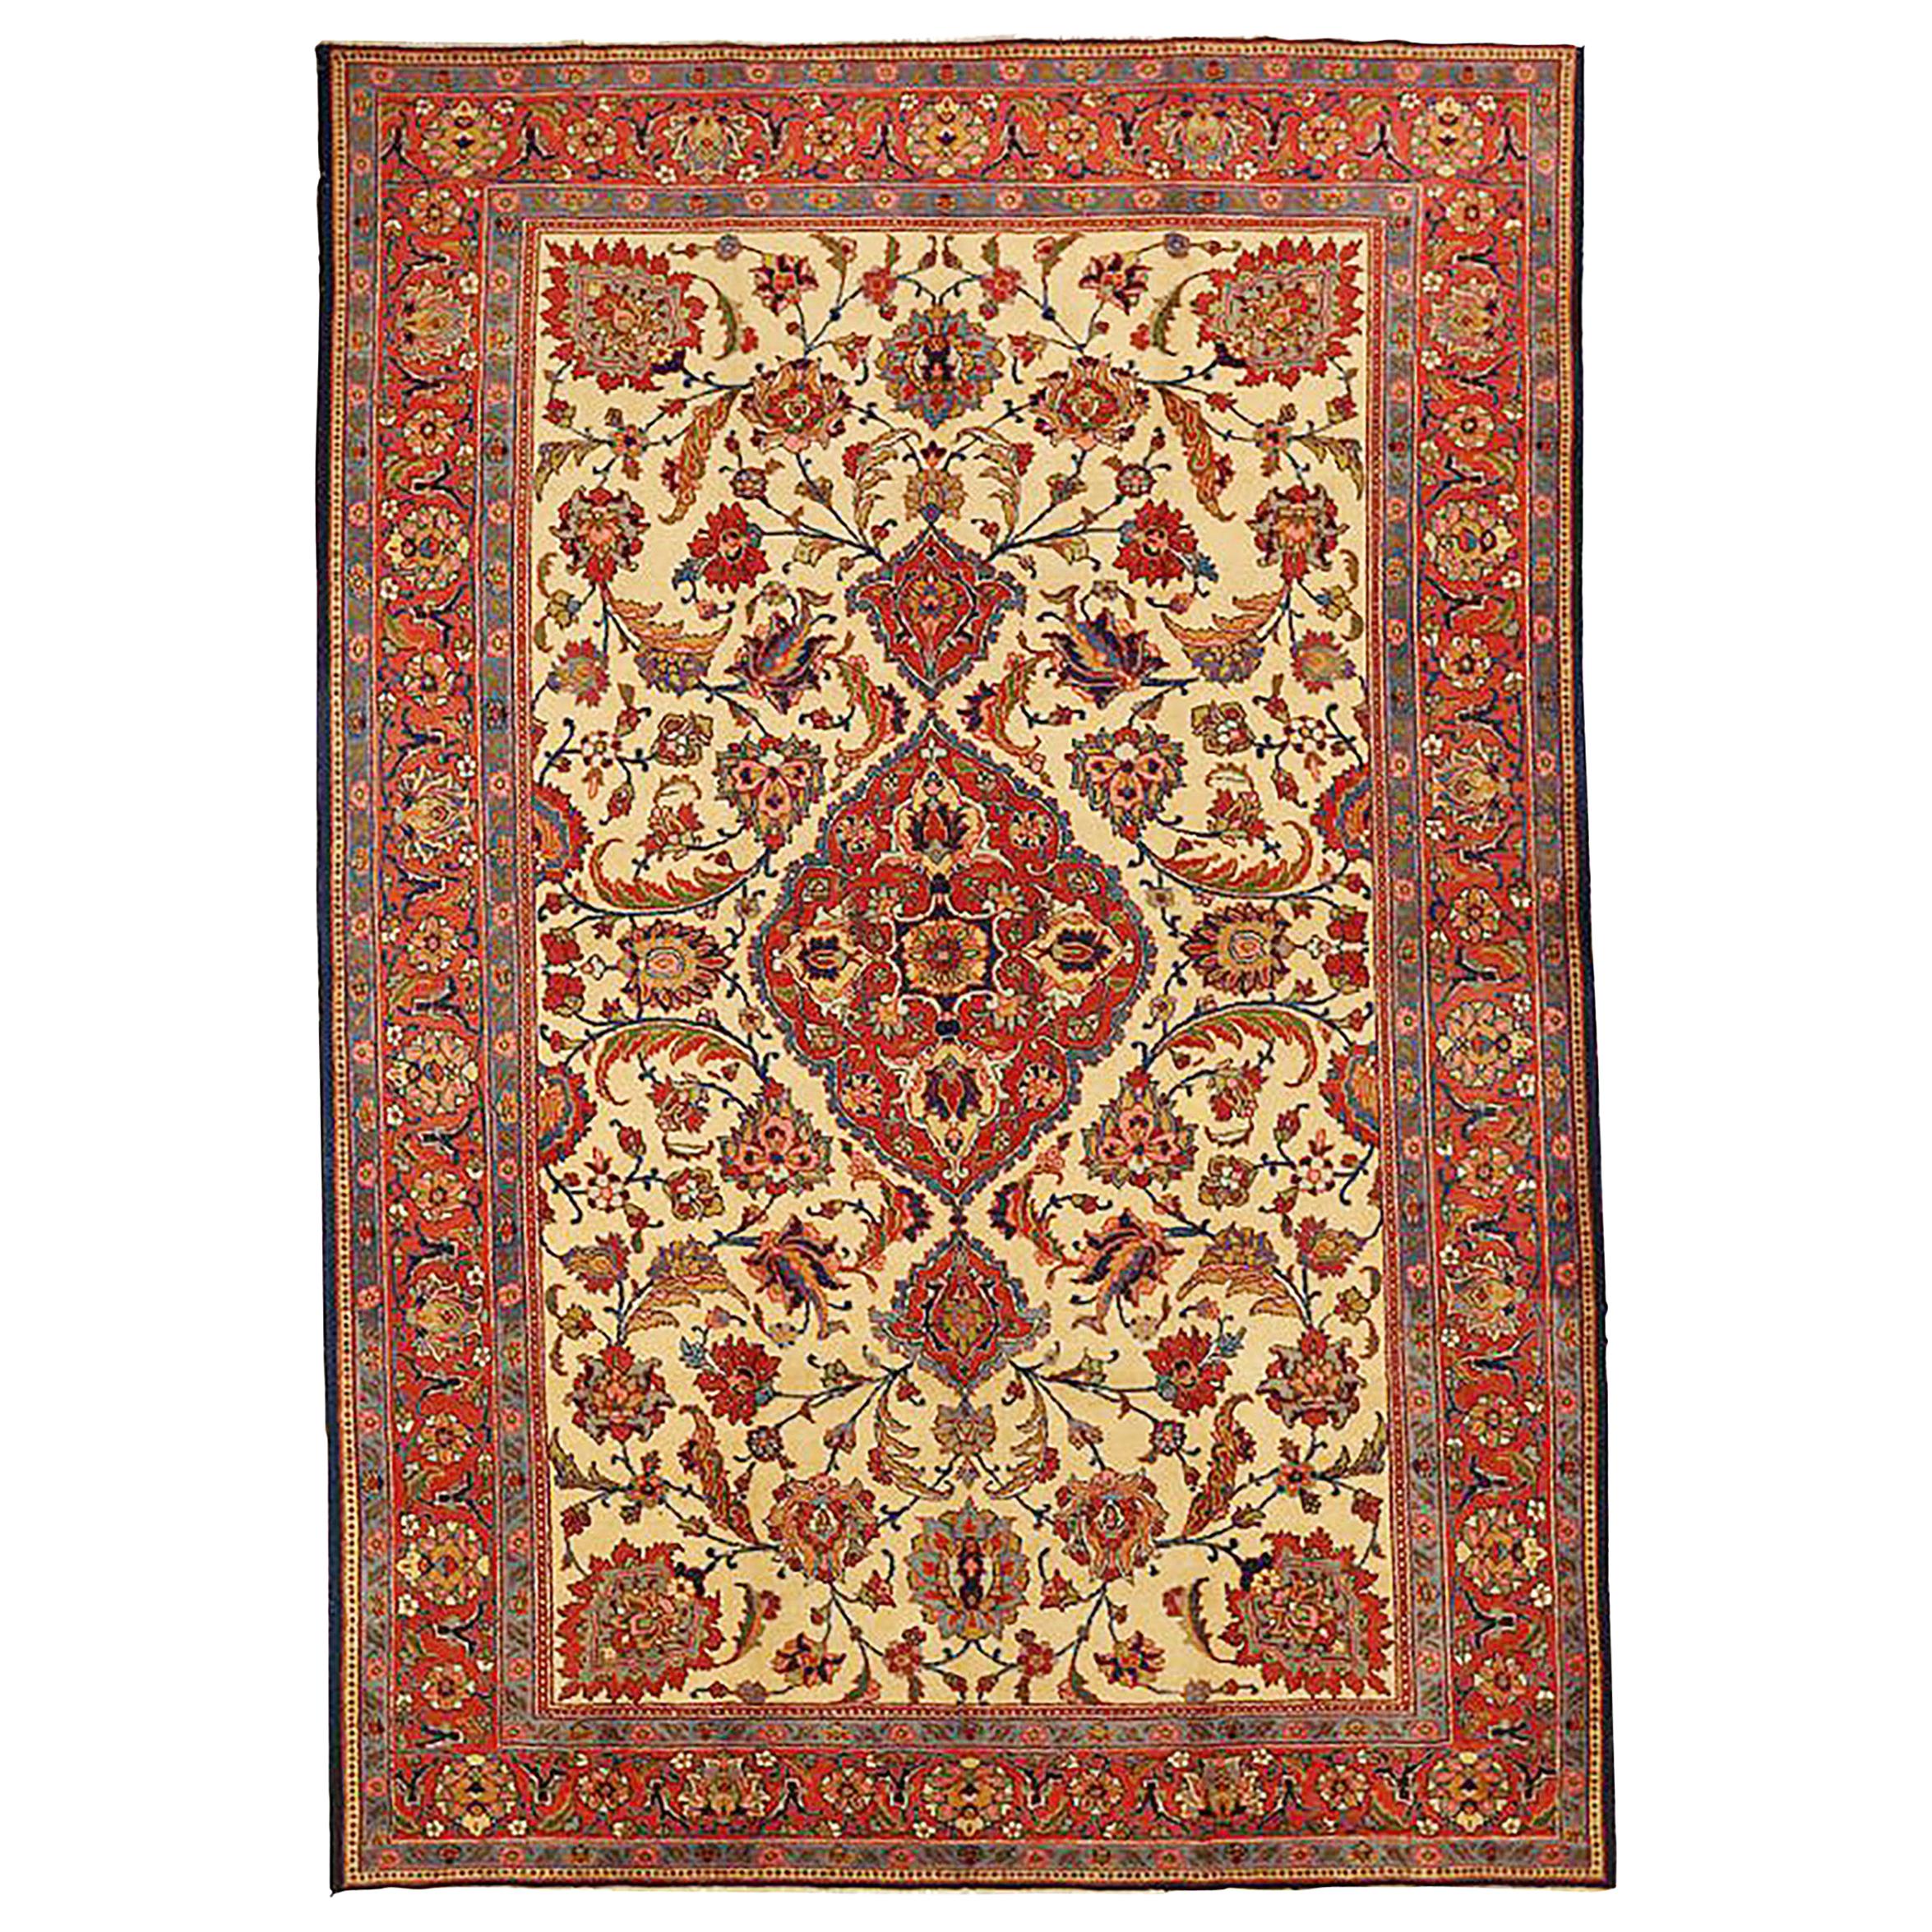 1910 Antique Persian Tabriz Rug with Red and Beige Flower Details on Ivory Field